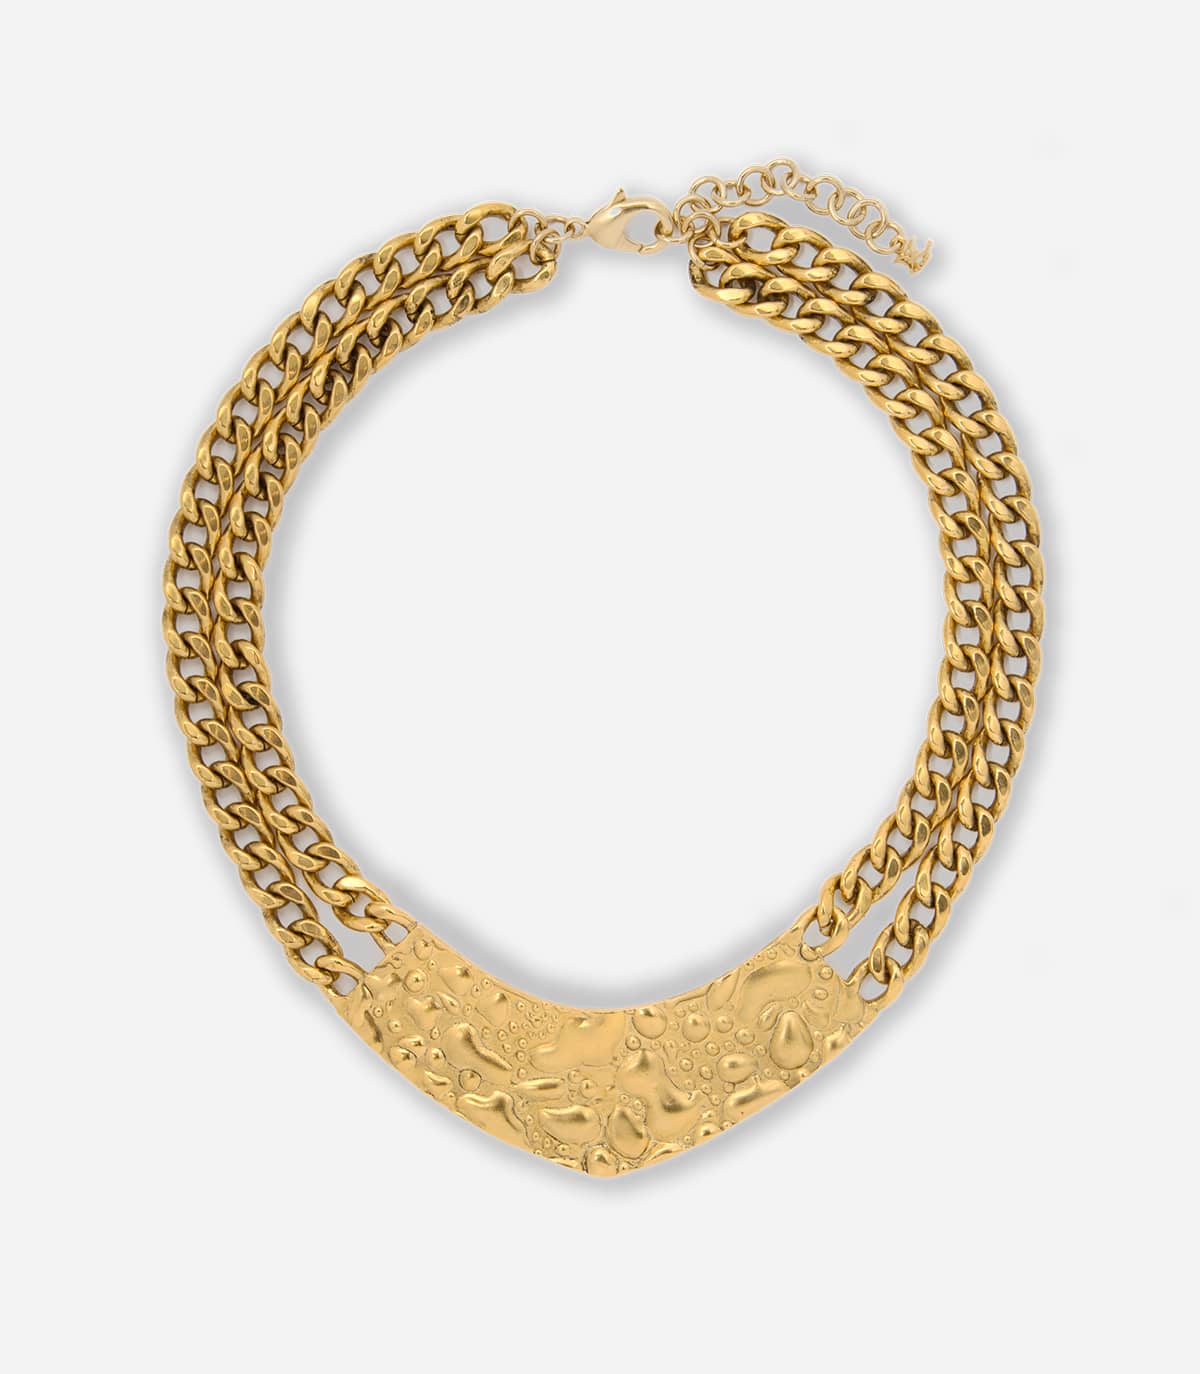 DROP TEXTURED CHAIN NECKLACE